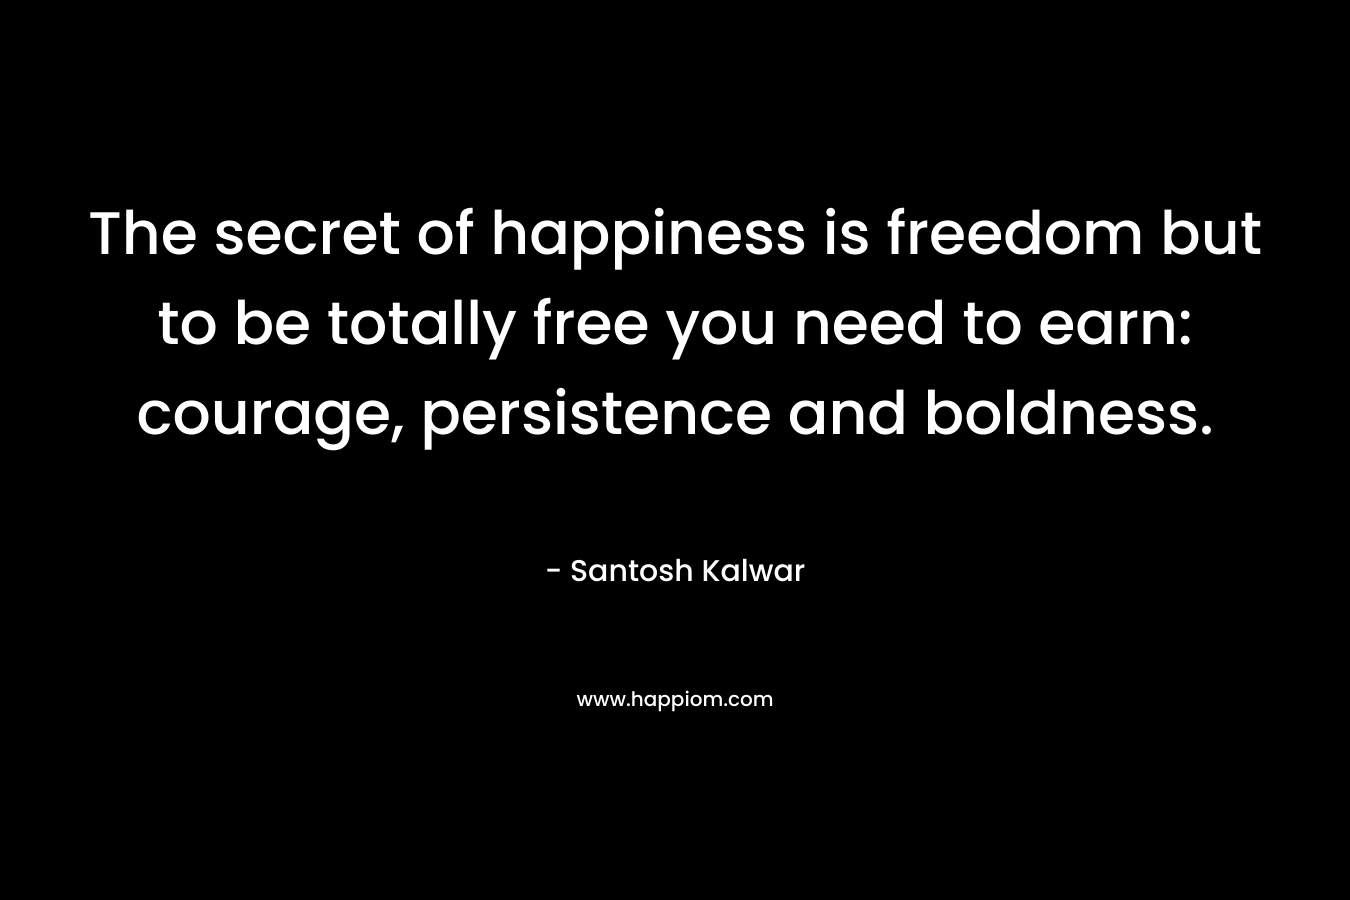 The secret of happiness is freedom but to be totally free you need to earn: courage, persistence and boldness.